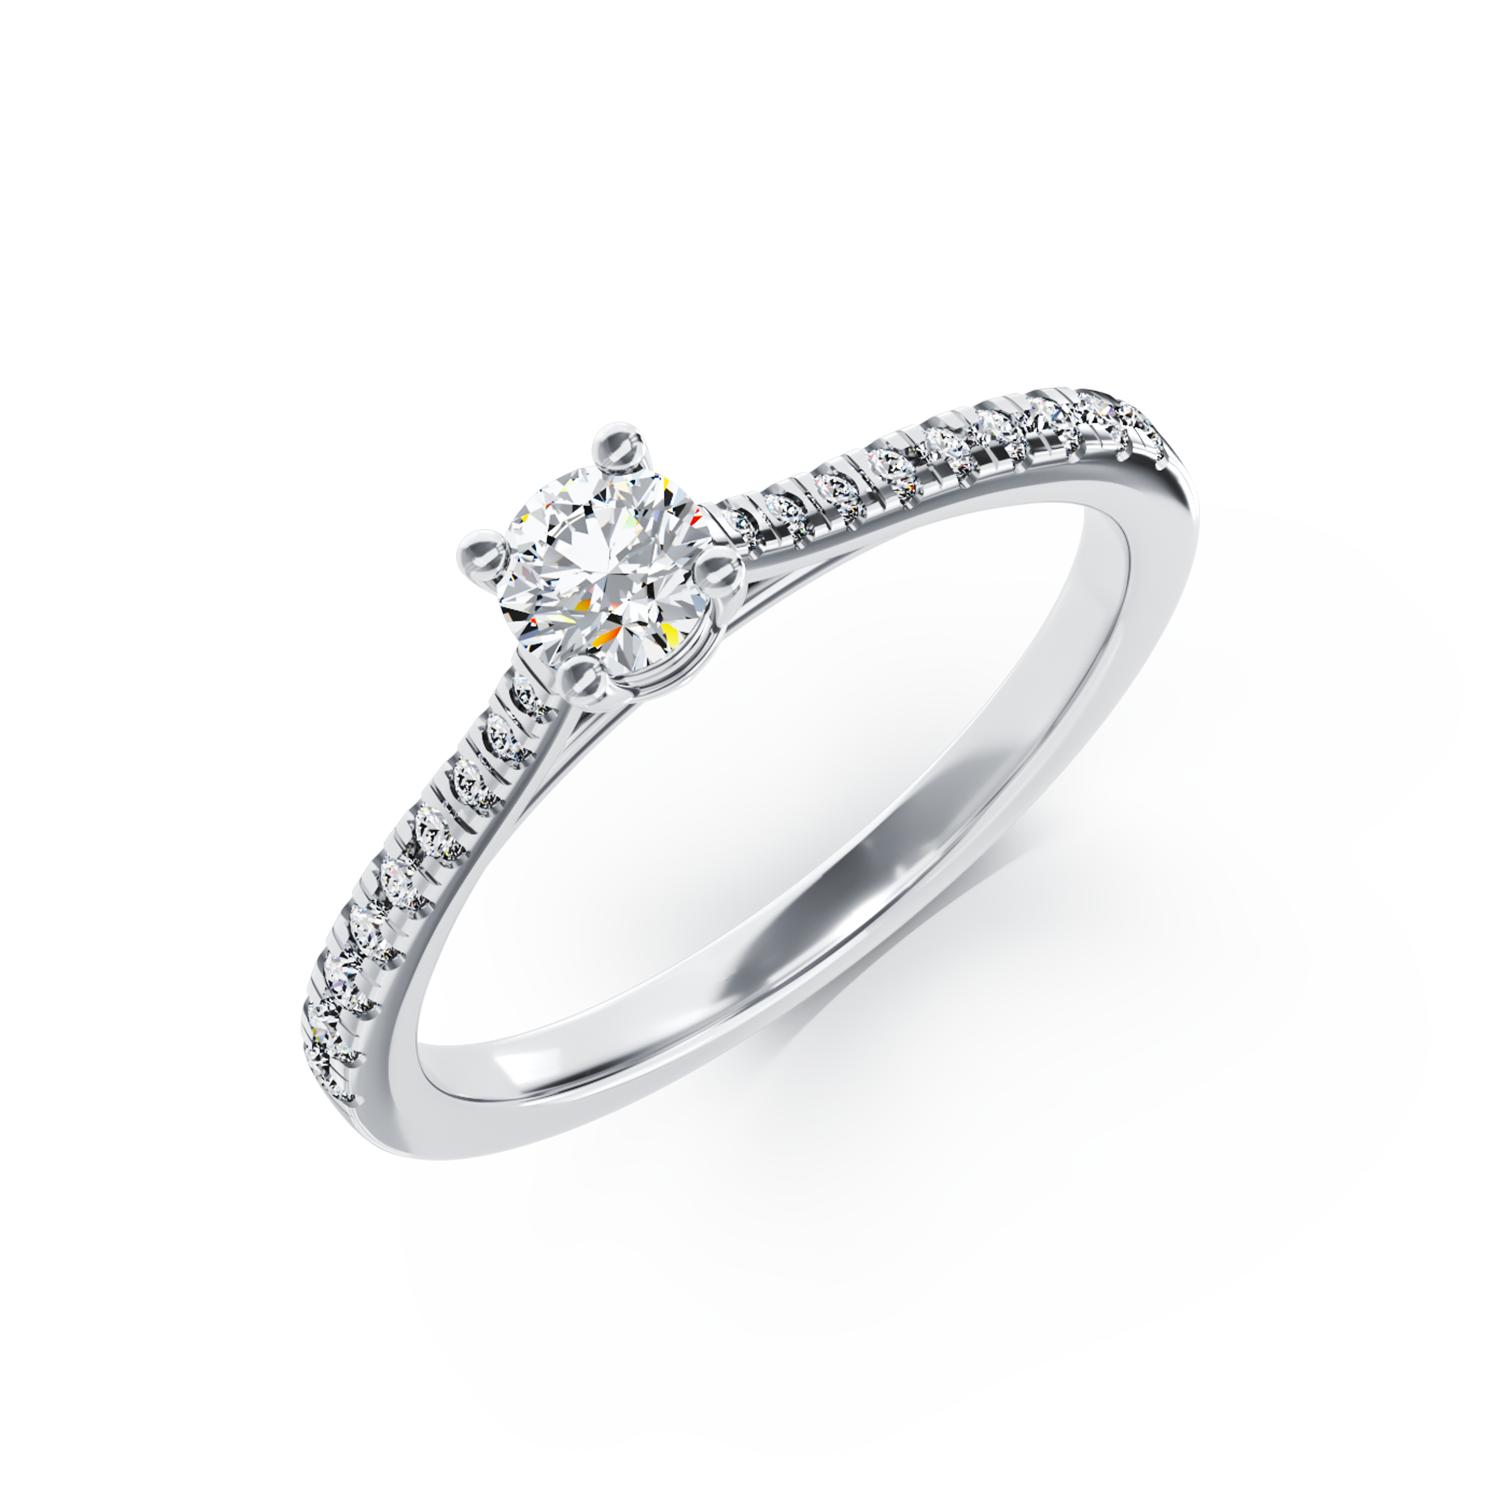 18K white gold engagement ring with 0.16ct diamond and 0.17ct diamonds